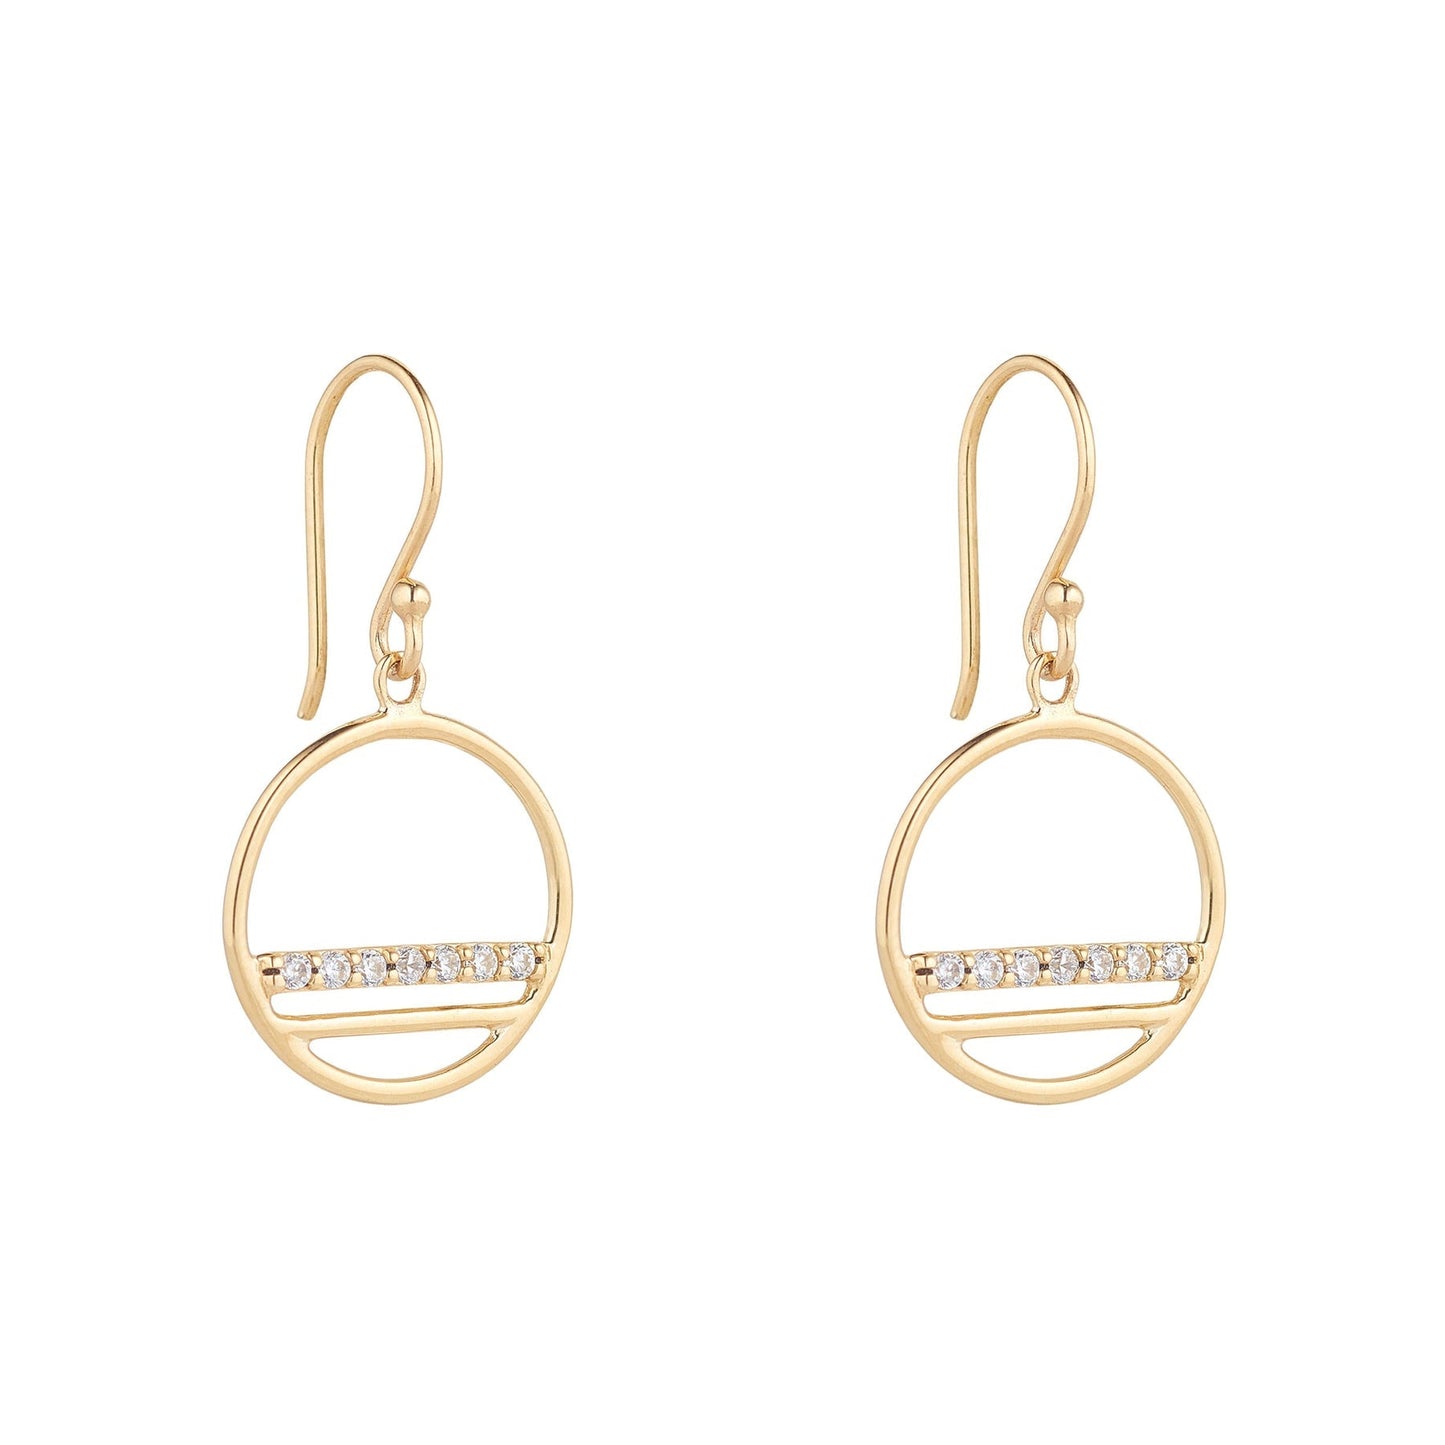 GOLD OPEN CIRCLE DROP EARRING WITH A CUBIC ZIRCONIA SET LINE - A & M News and Gifts